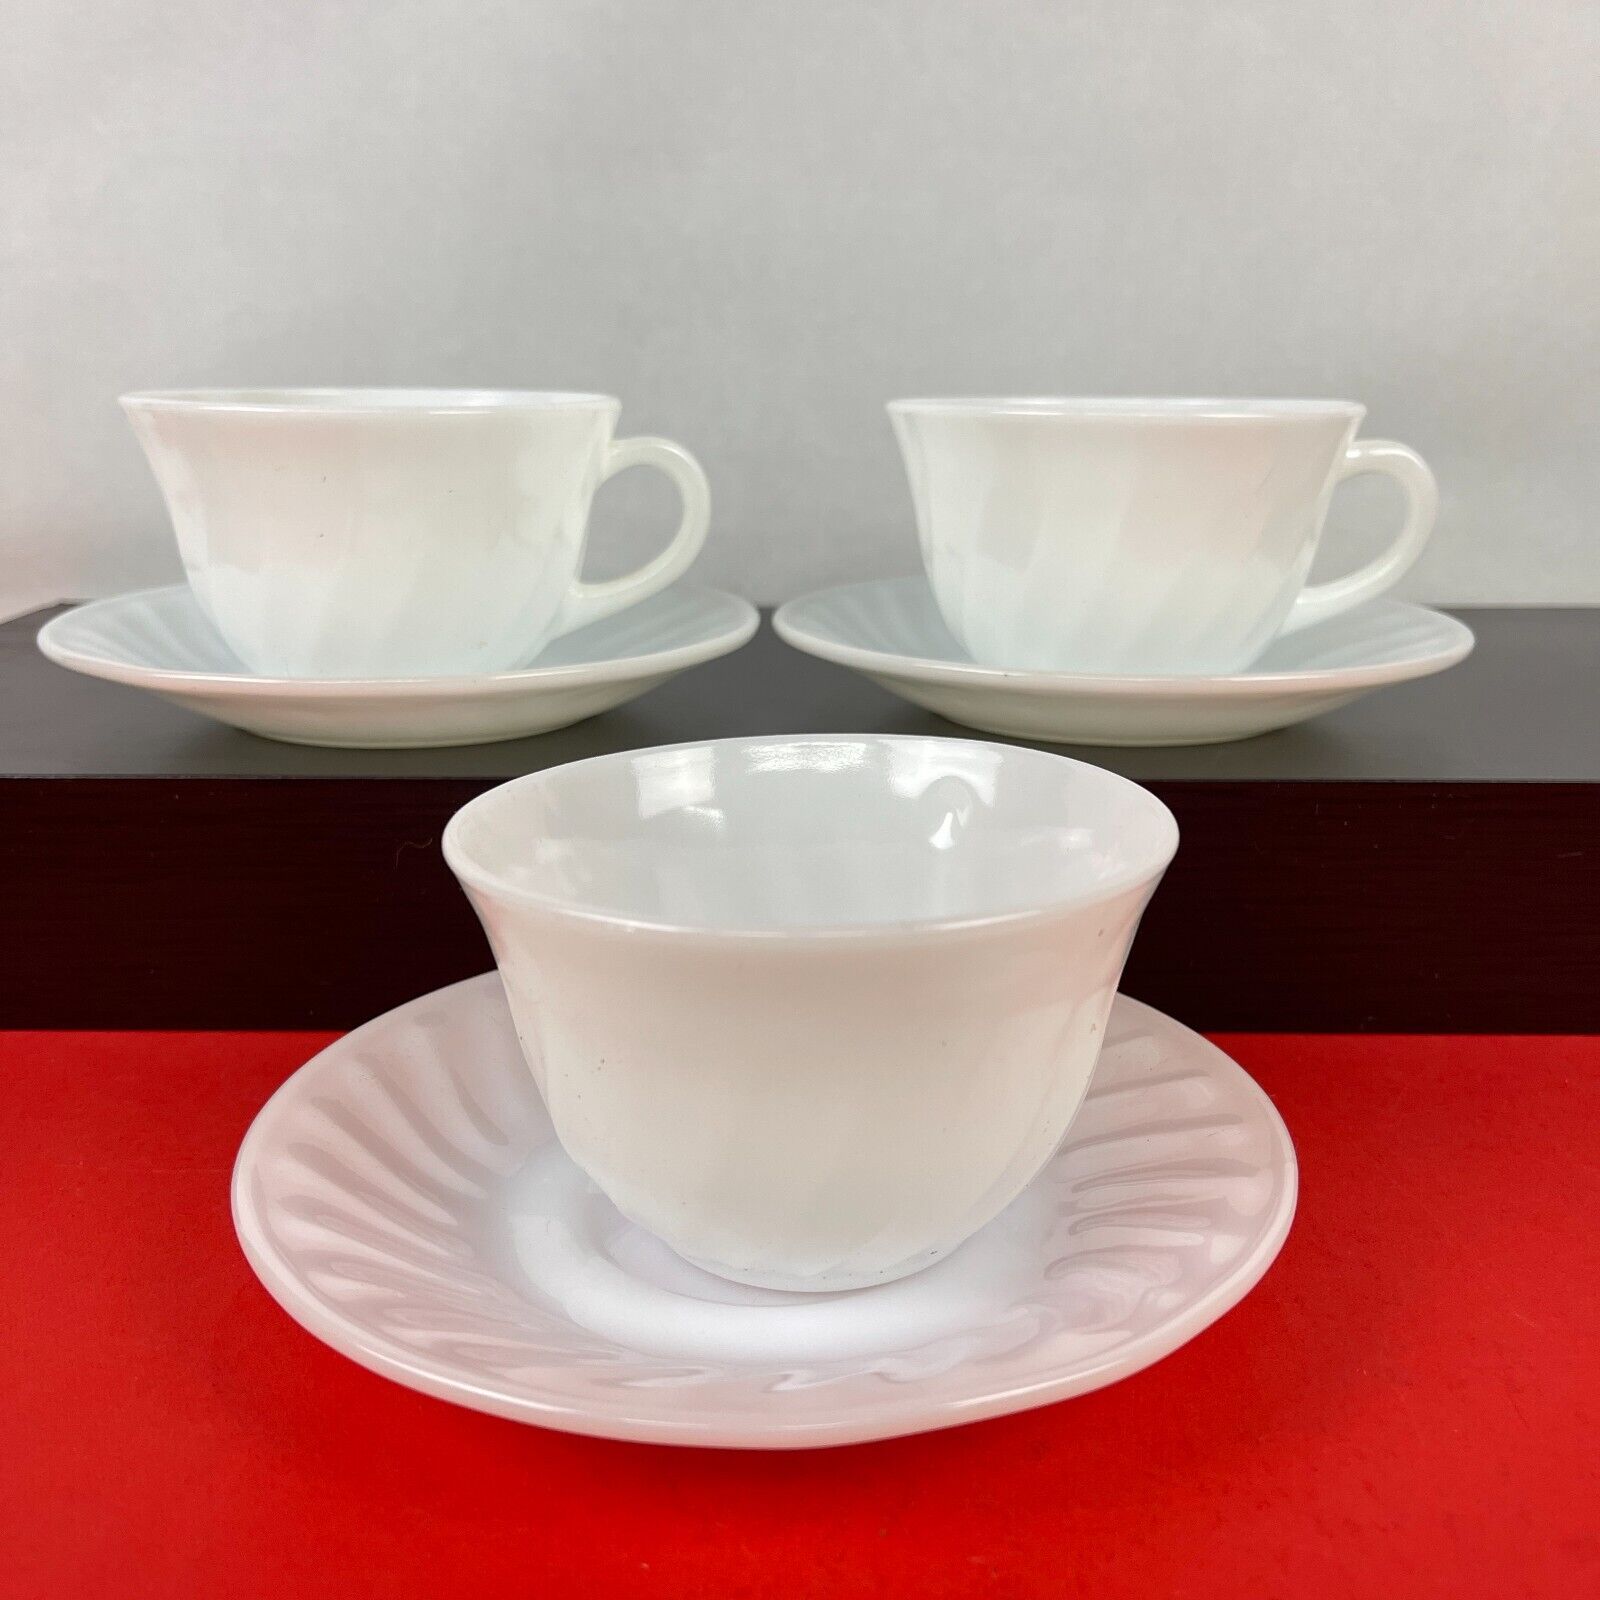 Vintage FIRE KING Wavy Swirl Milk Glass Cups and Saucers - Pristine Cond